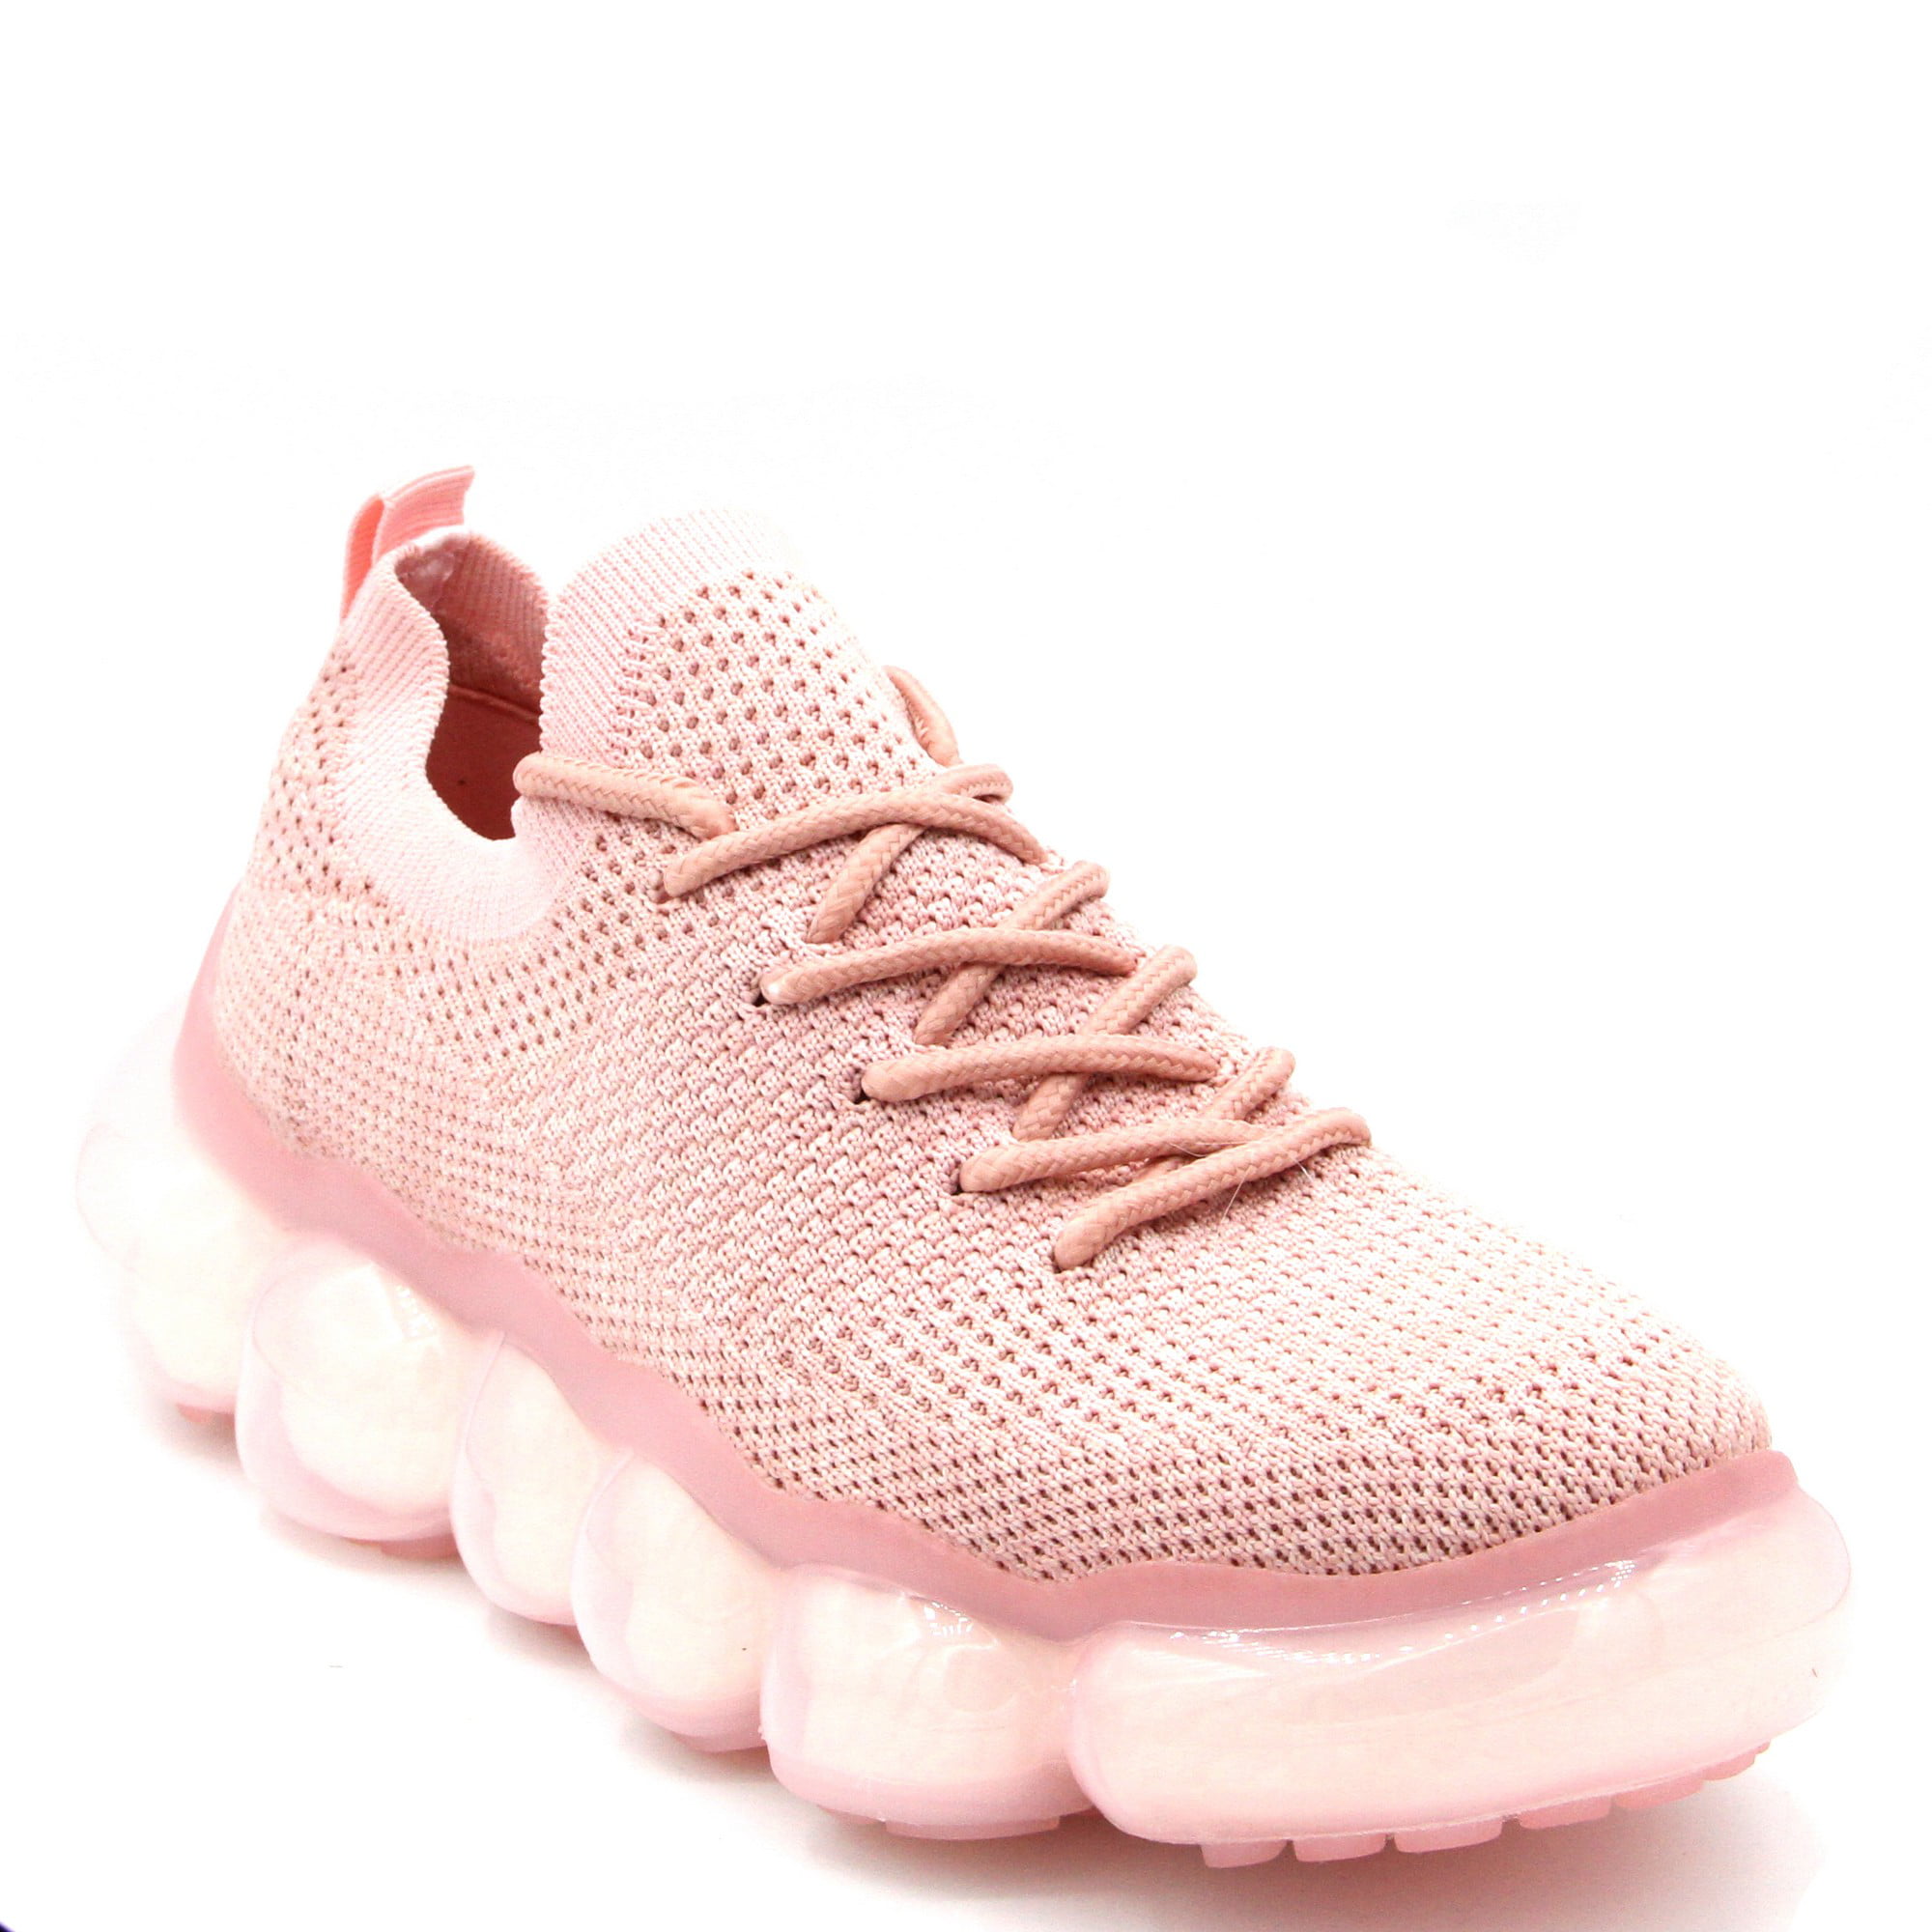 Women Cute Knitted Bubble Sole Sneakers Light Weight Lace Up Shoes Pink -